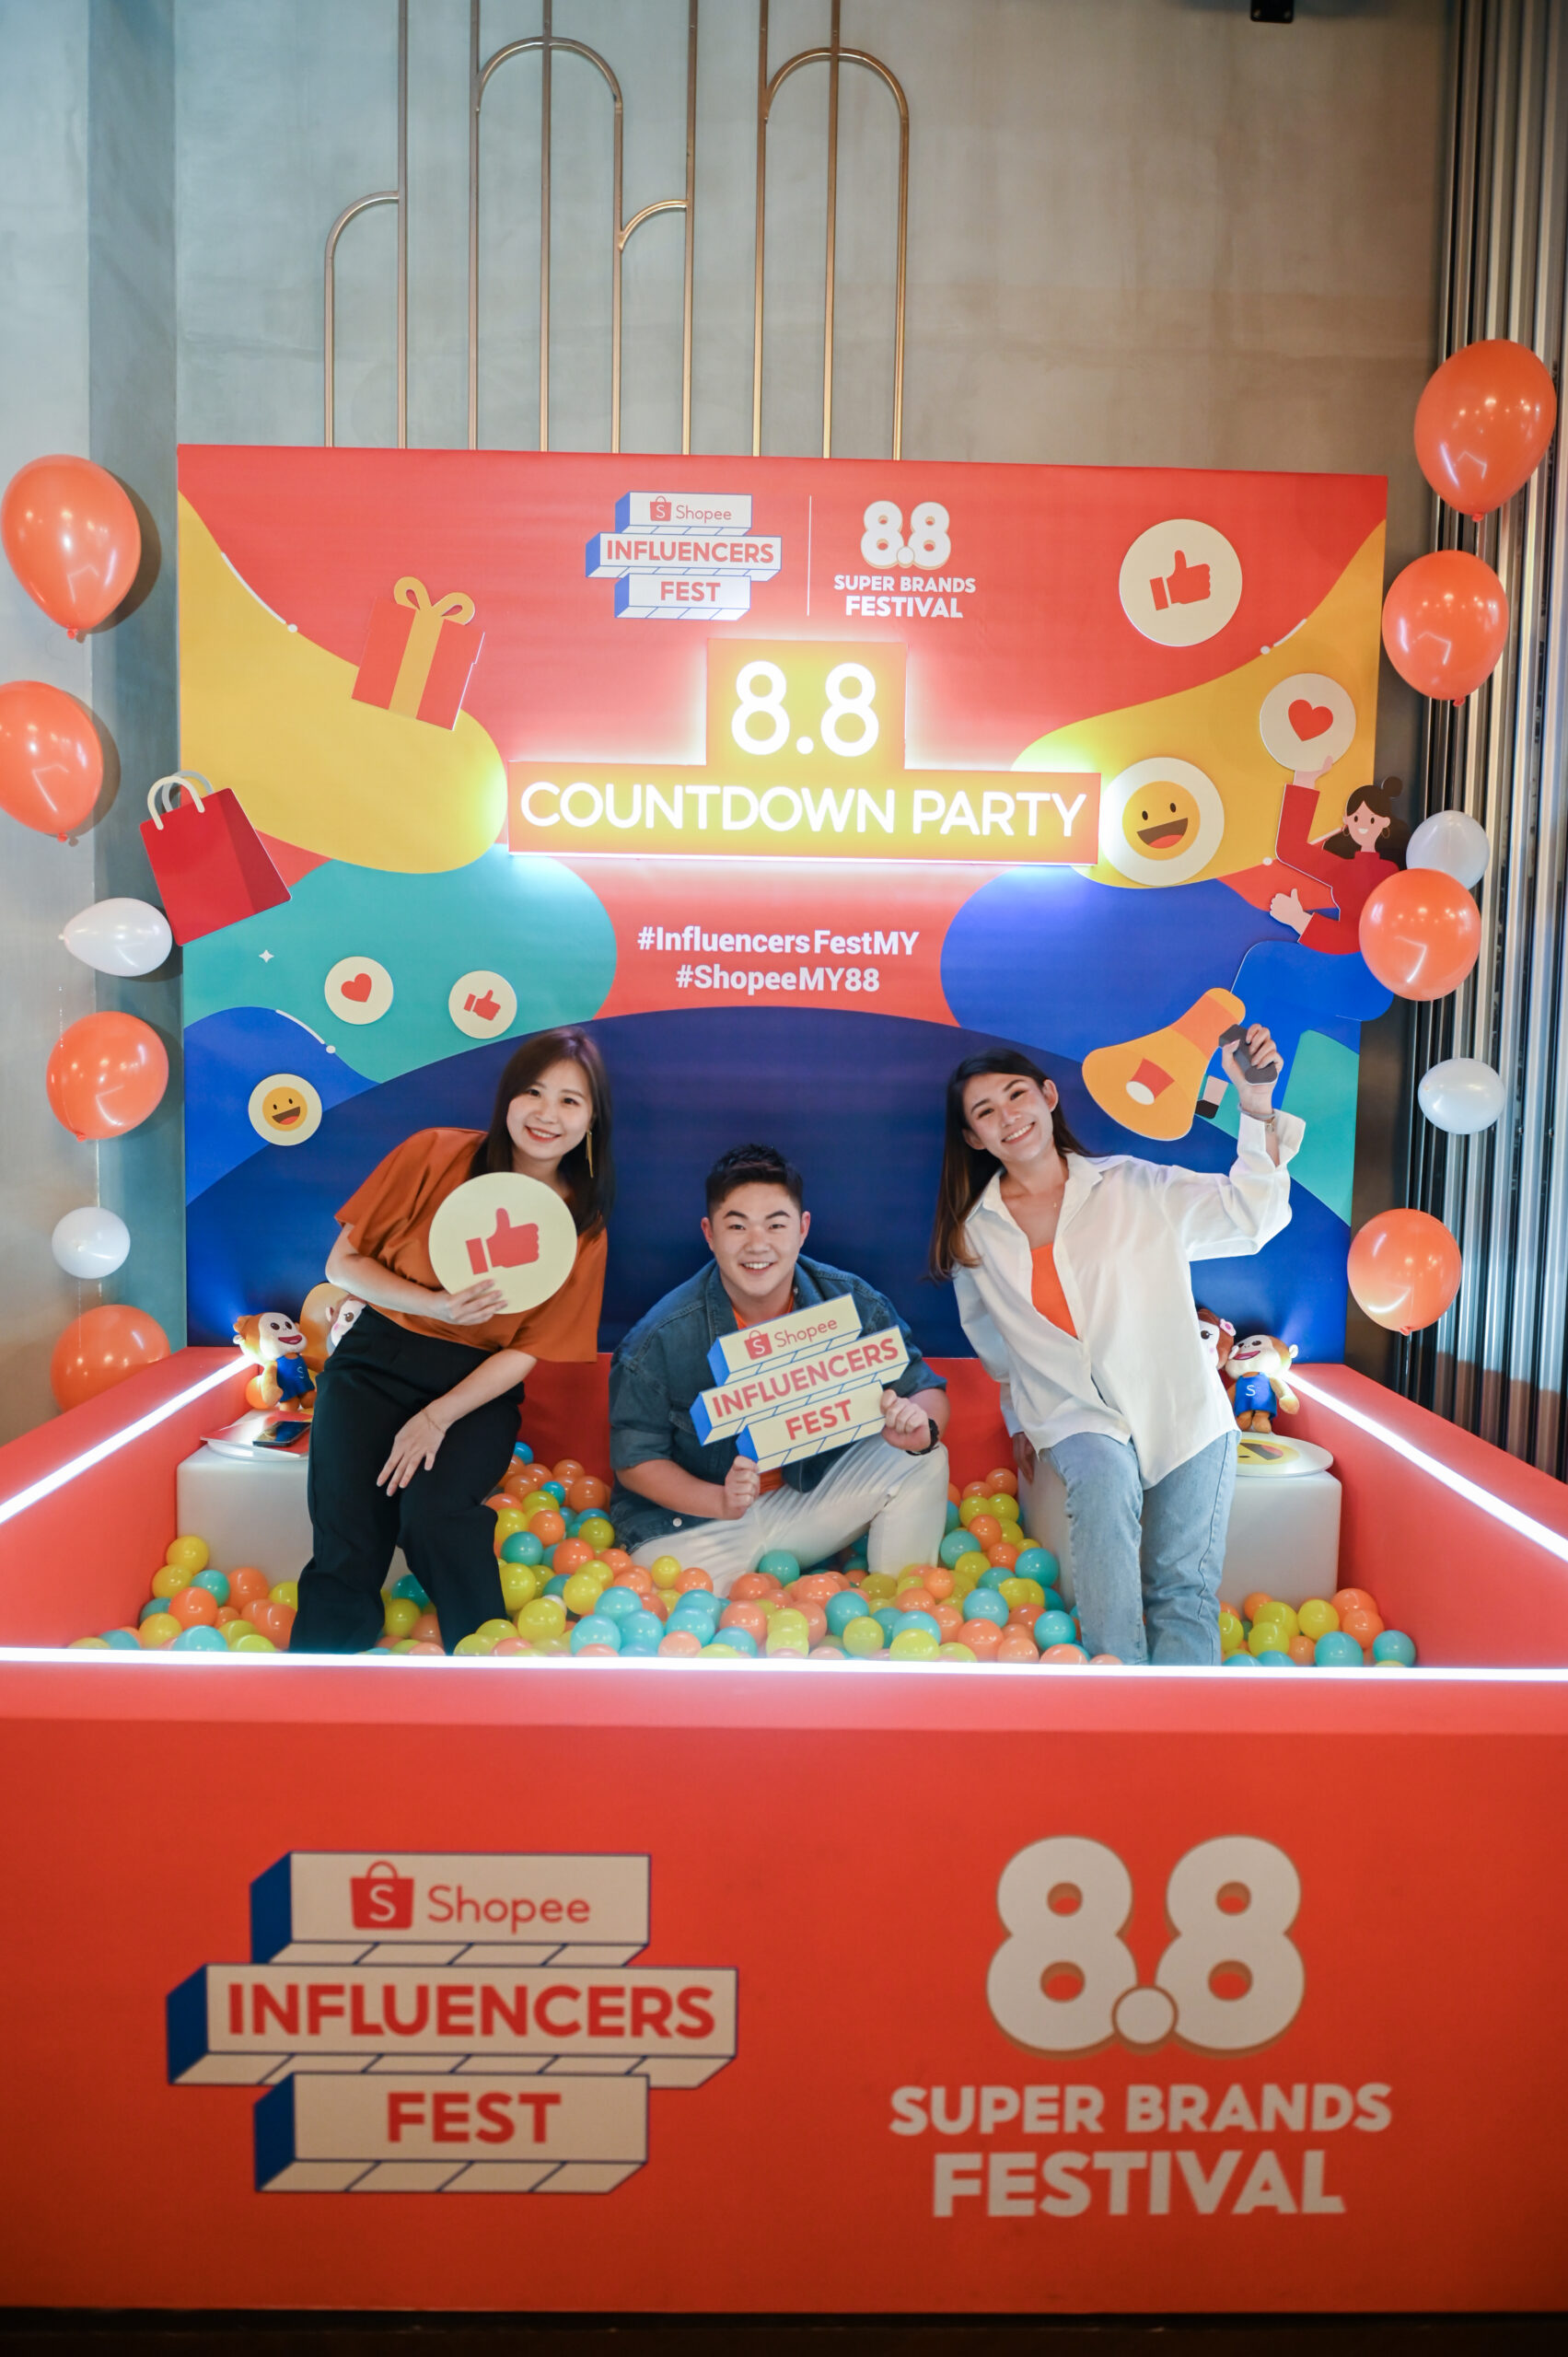 Shopee Influencers Fest 8.8 Countdown Party Engagement scaled